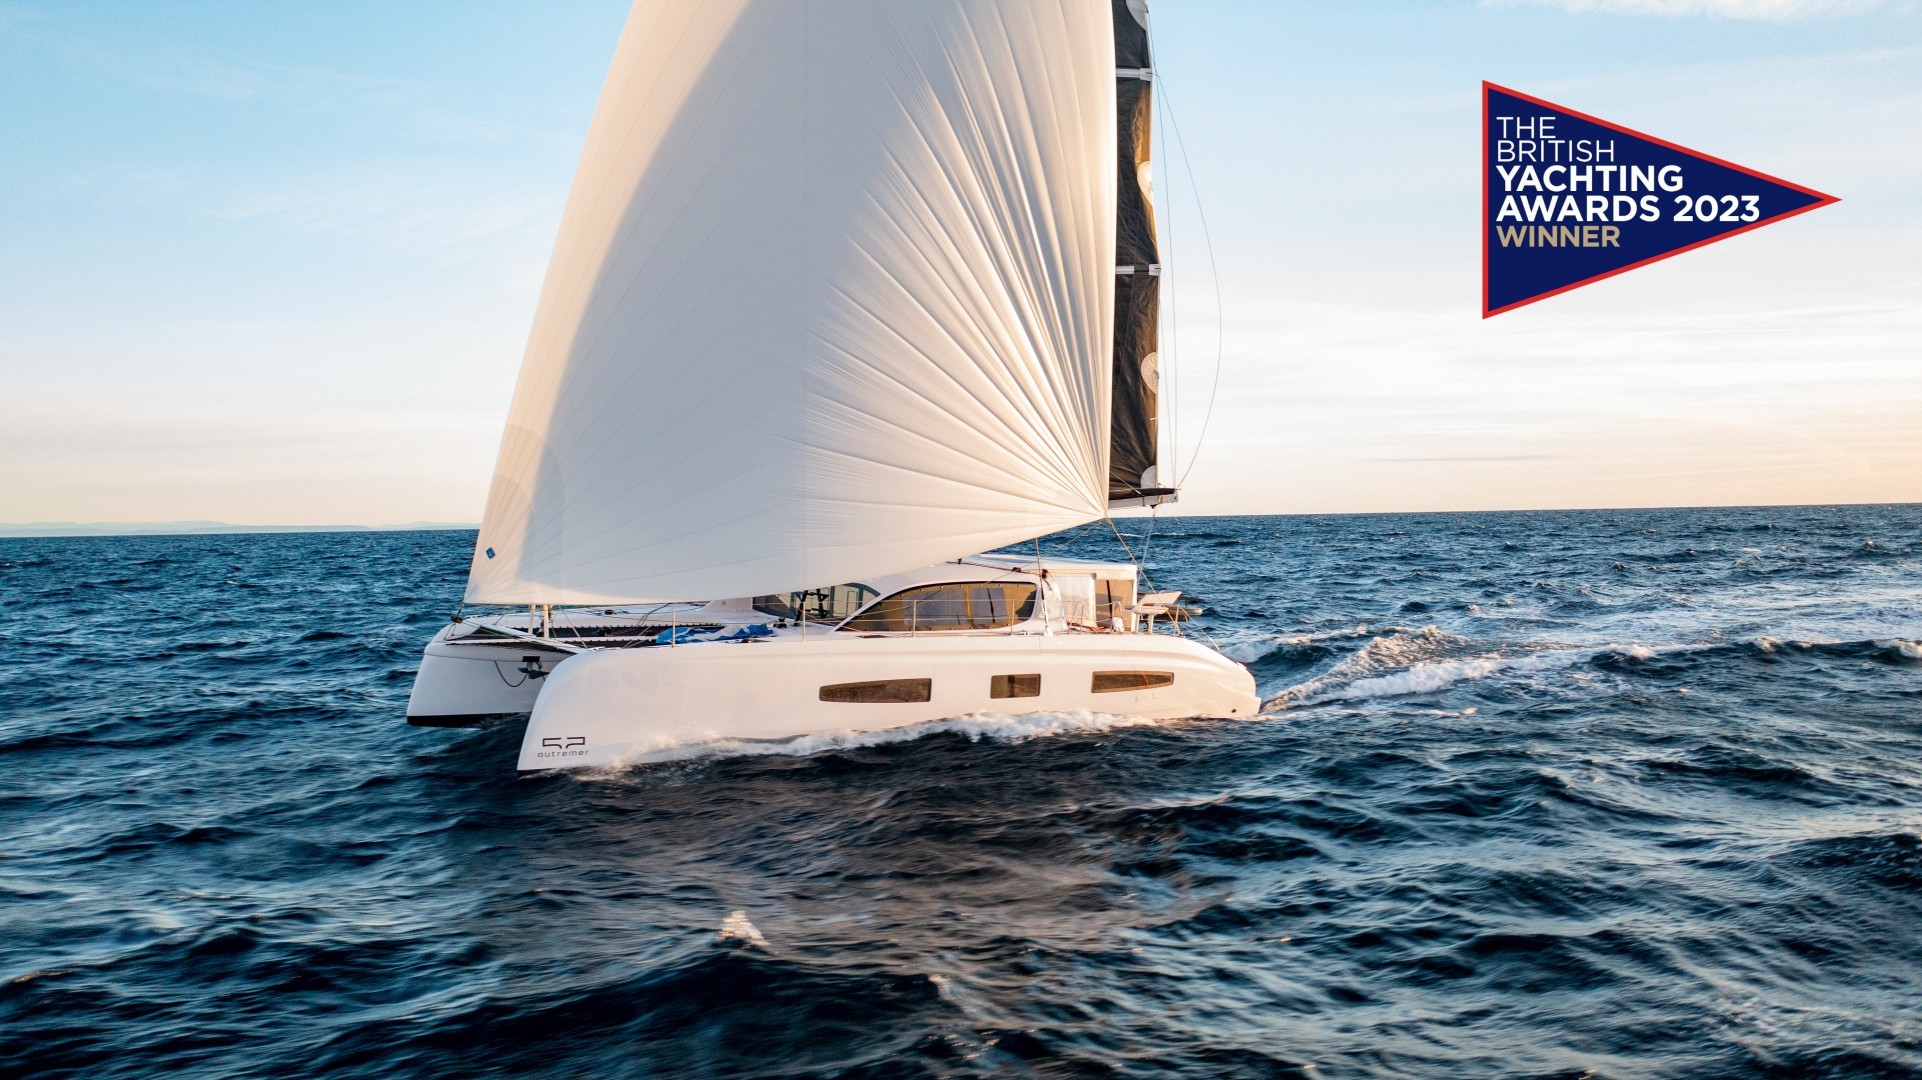 Outremer 52 voted multihull of the year at British Yachting Awards 2023